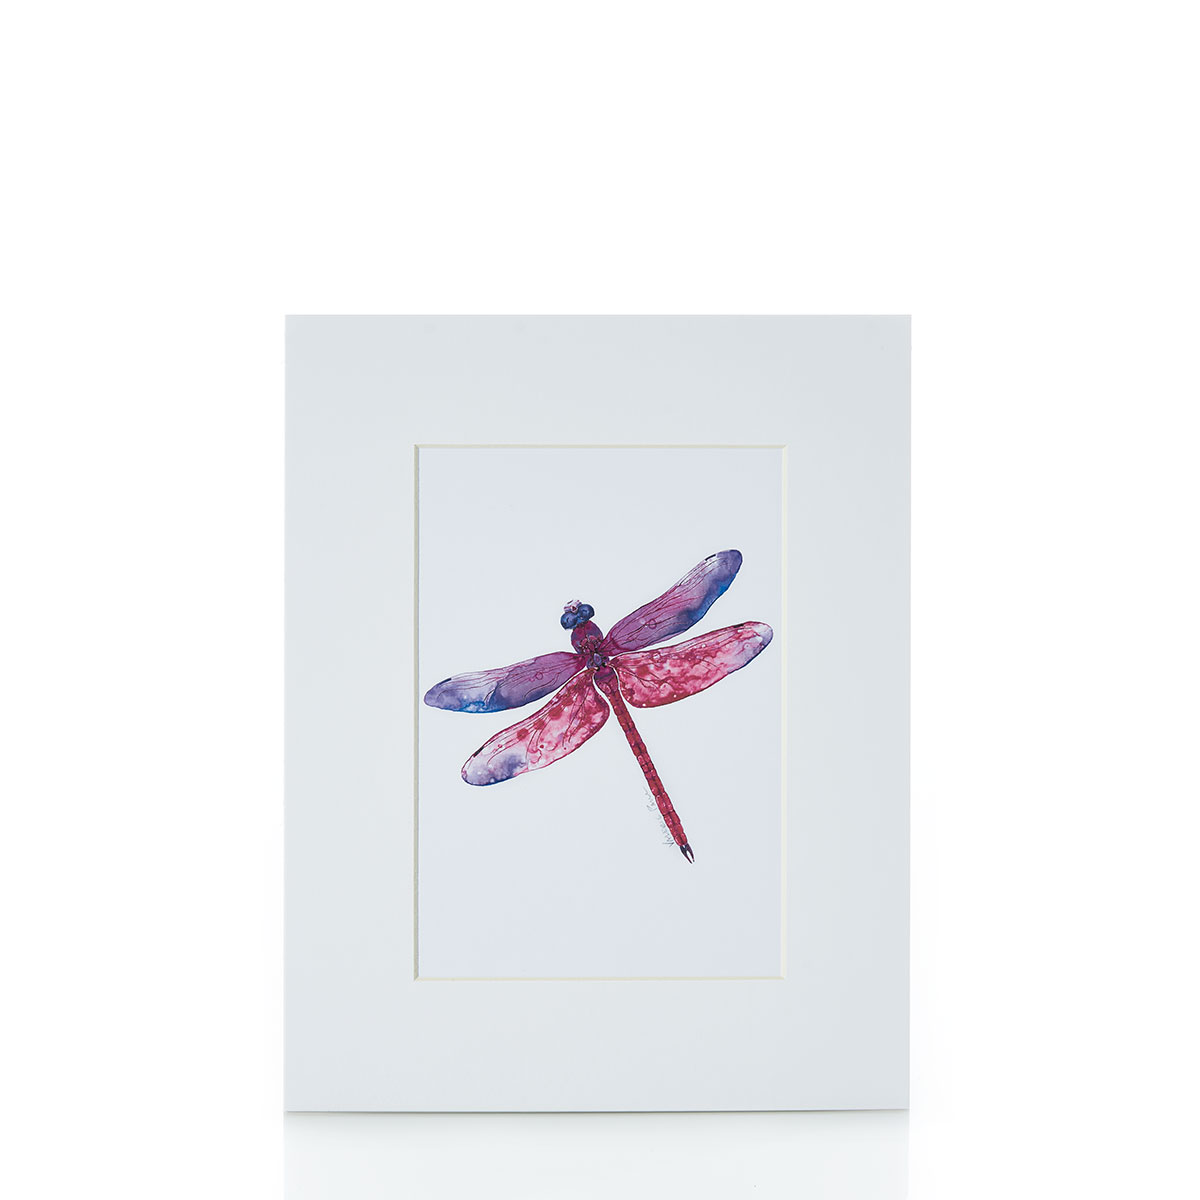 Cure Watercolor Dragonfly Matted Print